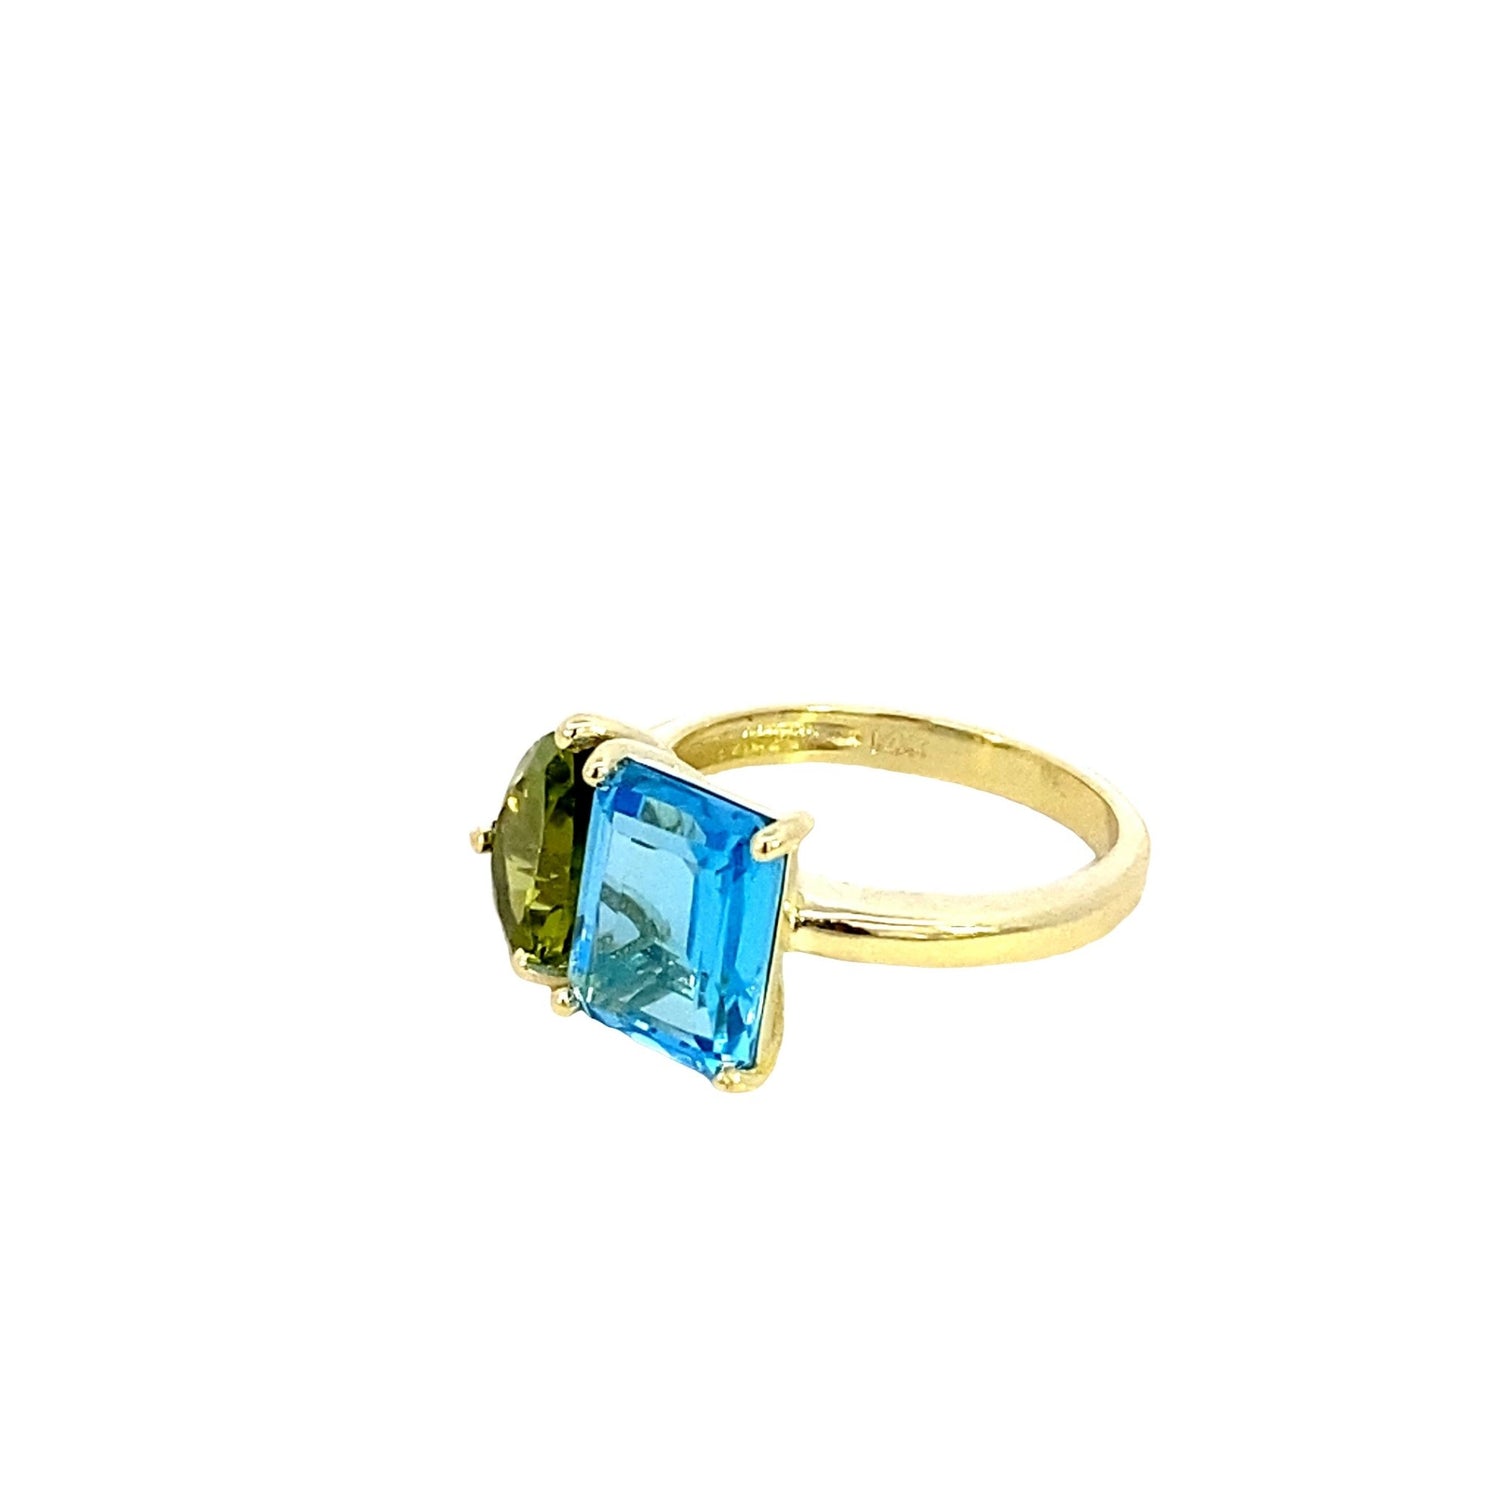 Ring blue topaz and peridot 14kt yellow gold - Gaines Jewelers